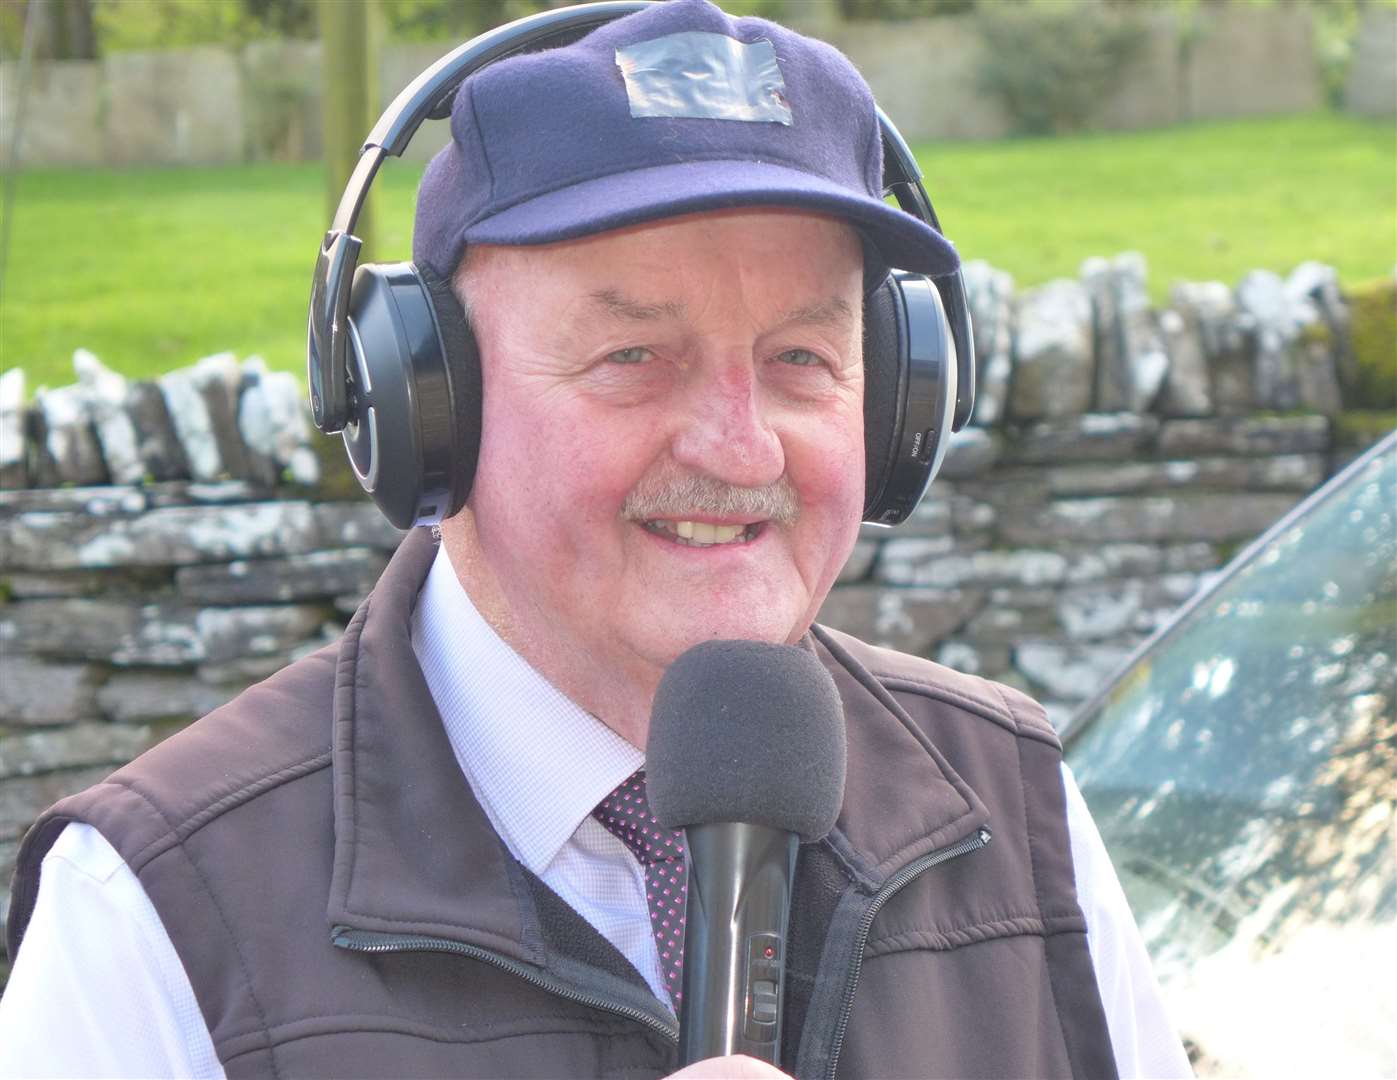 Banger racing fan Willie Mackay has sponsored the overall winners trophy and will be heading the commentary team for this Sunday's non stop thrills and excitement.